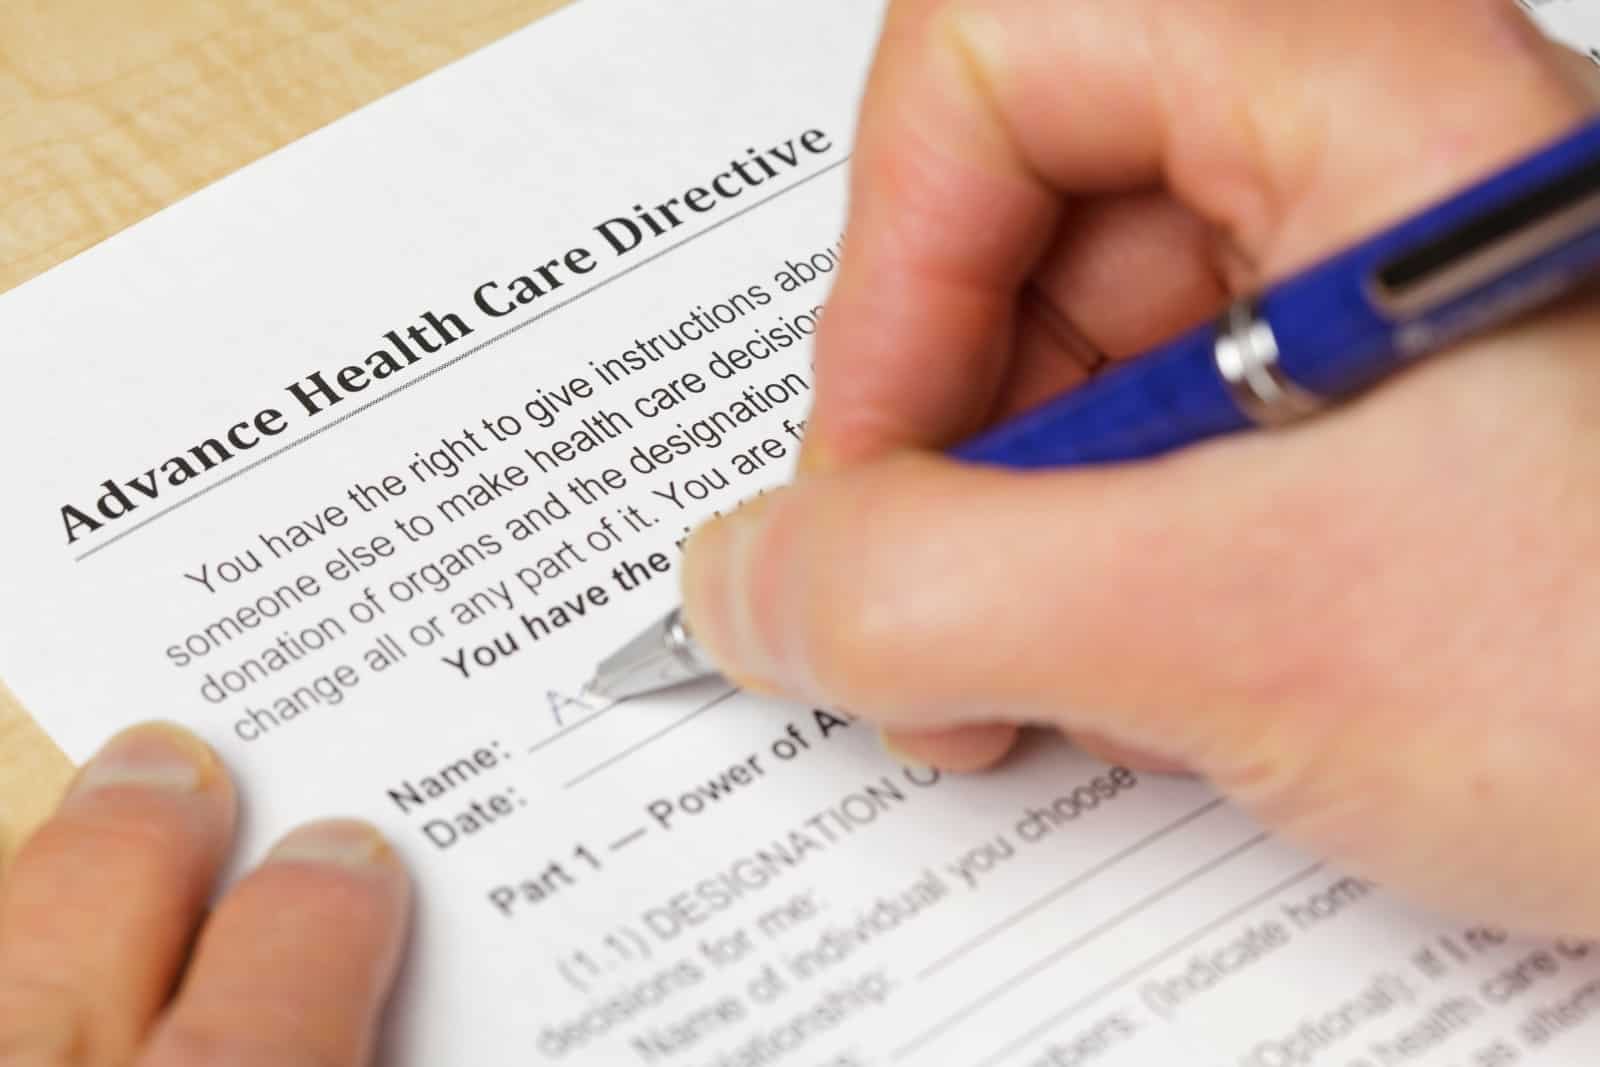 contract - advance medical directives